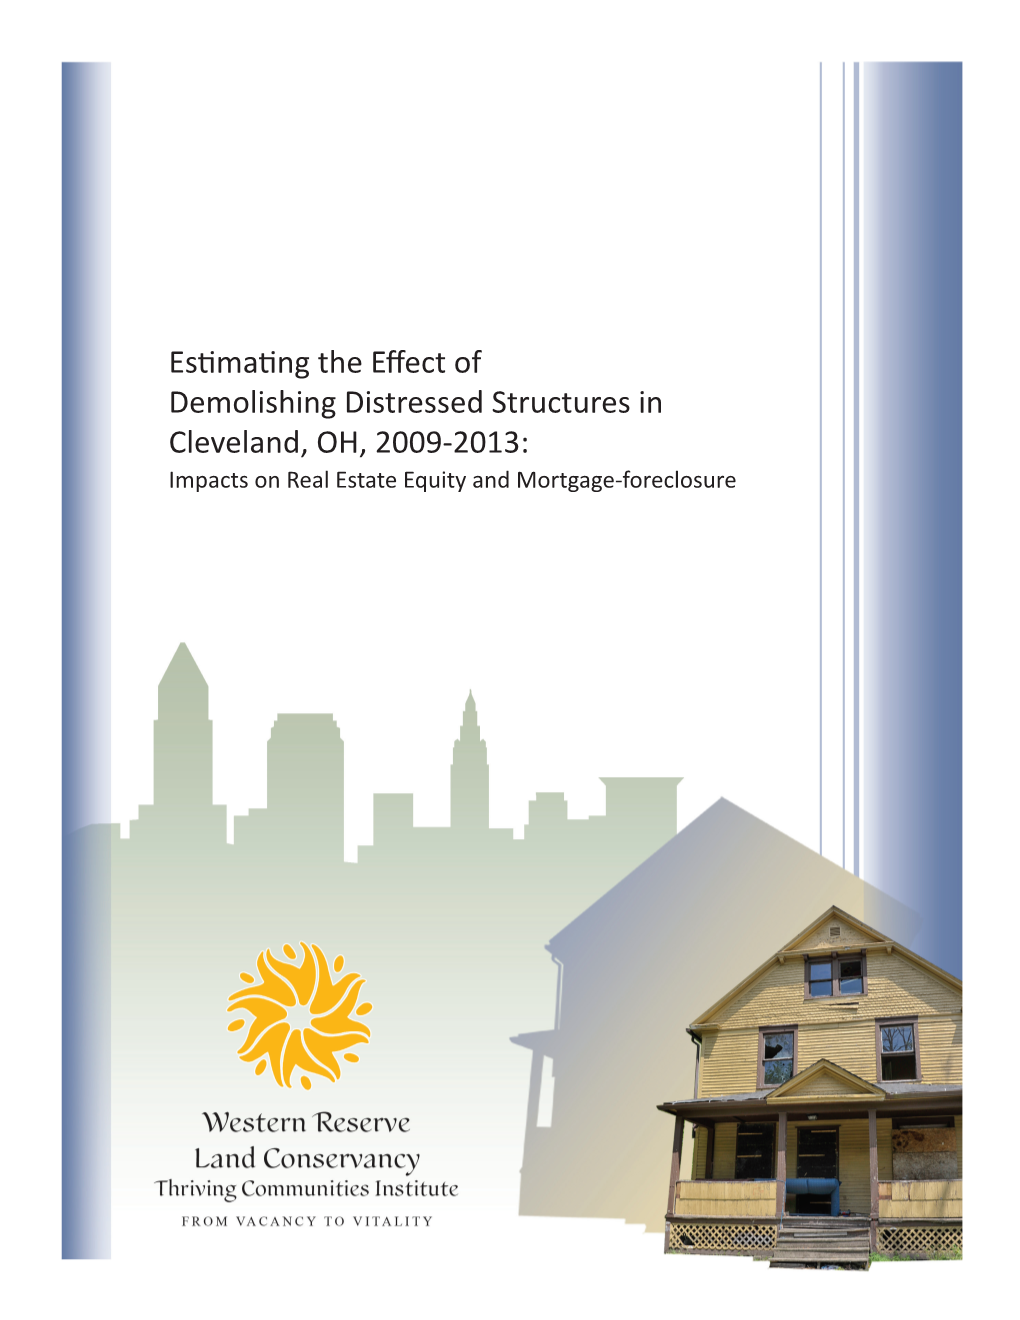 Estimating the Effect of Demolishing Distressed Structures in Cleveland, OH, 2009-2013: Impacts on Real Estate Equity and Mortgage-Foreclosure